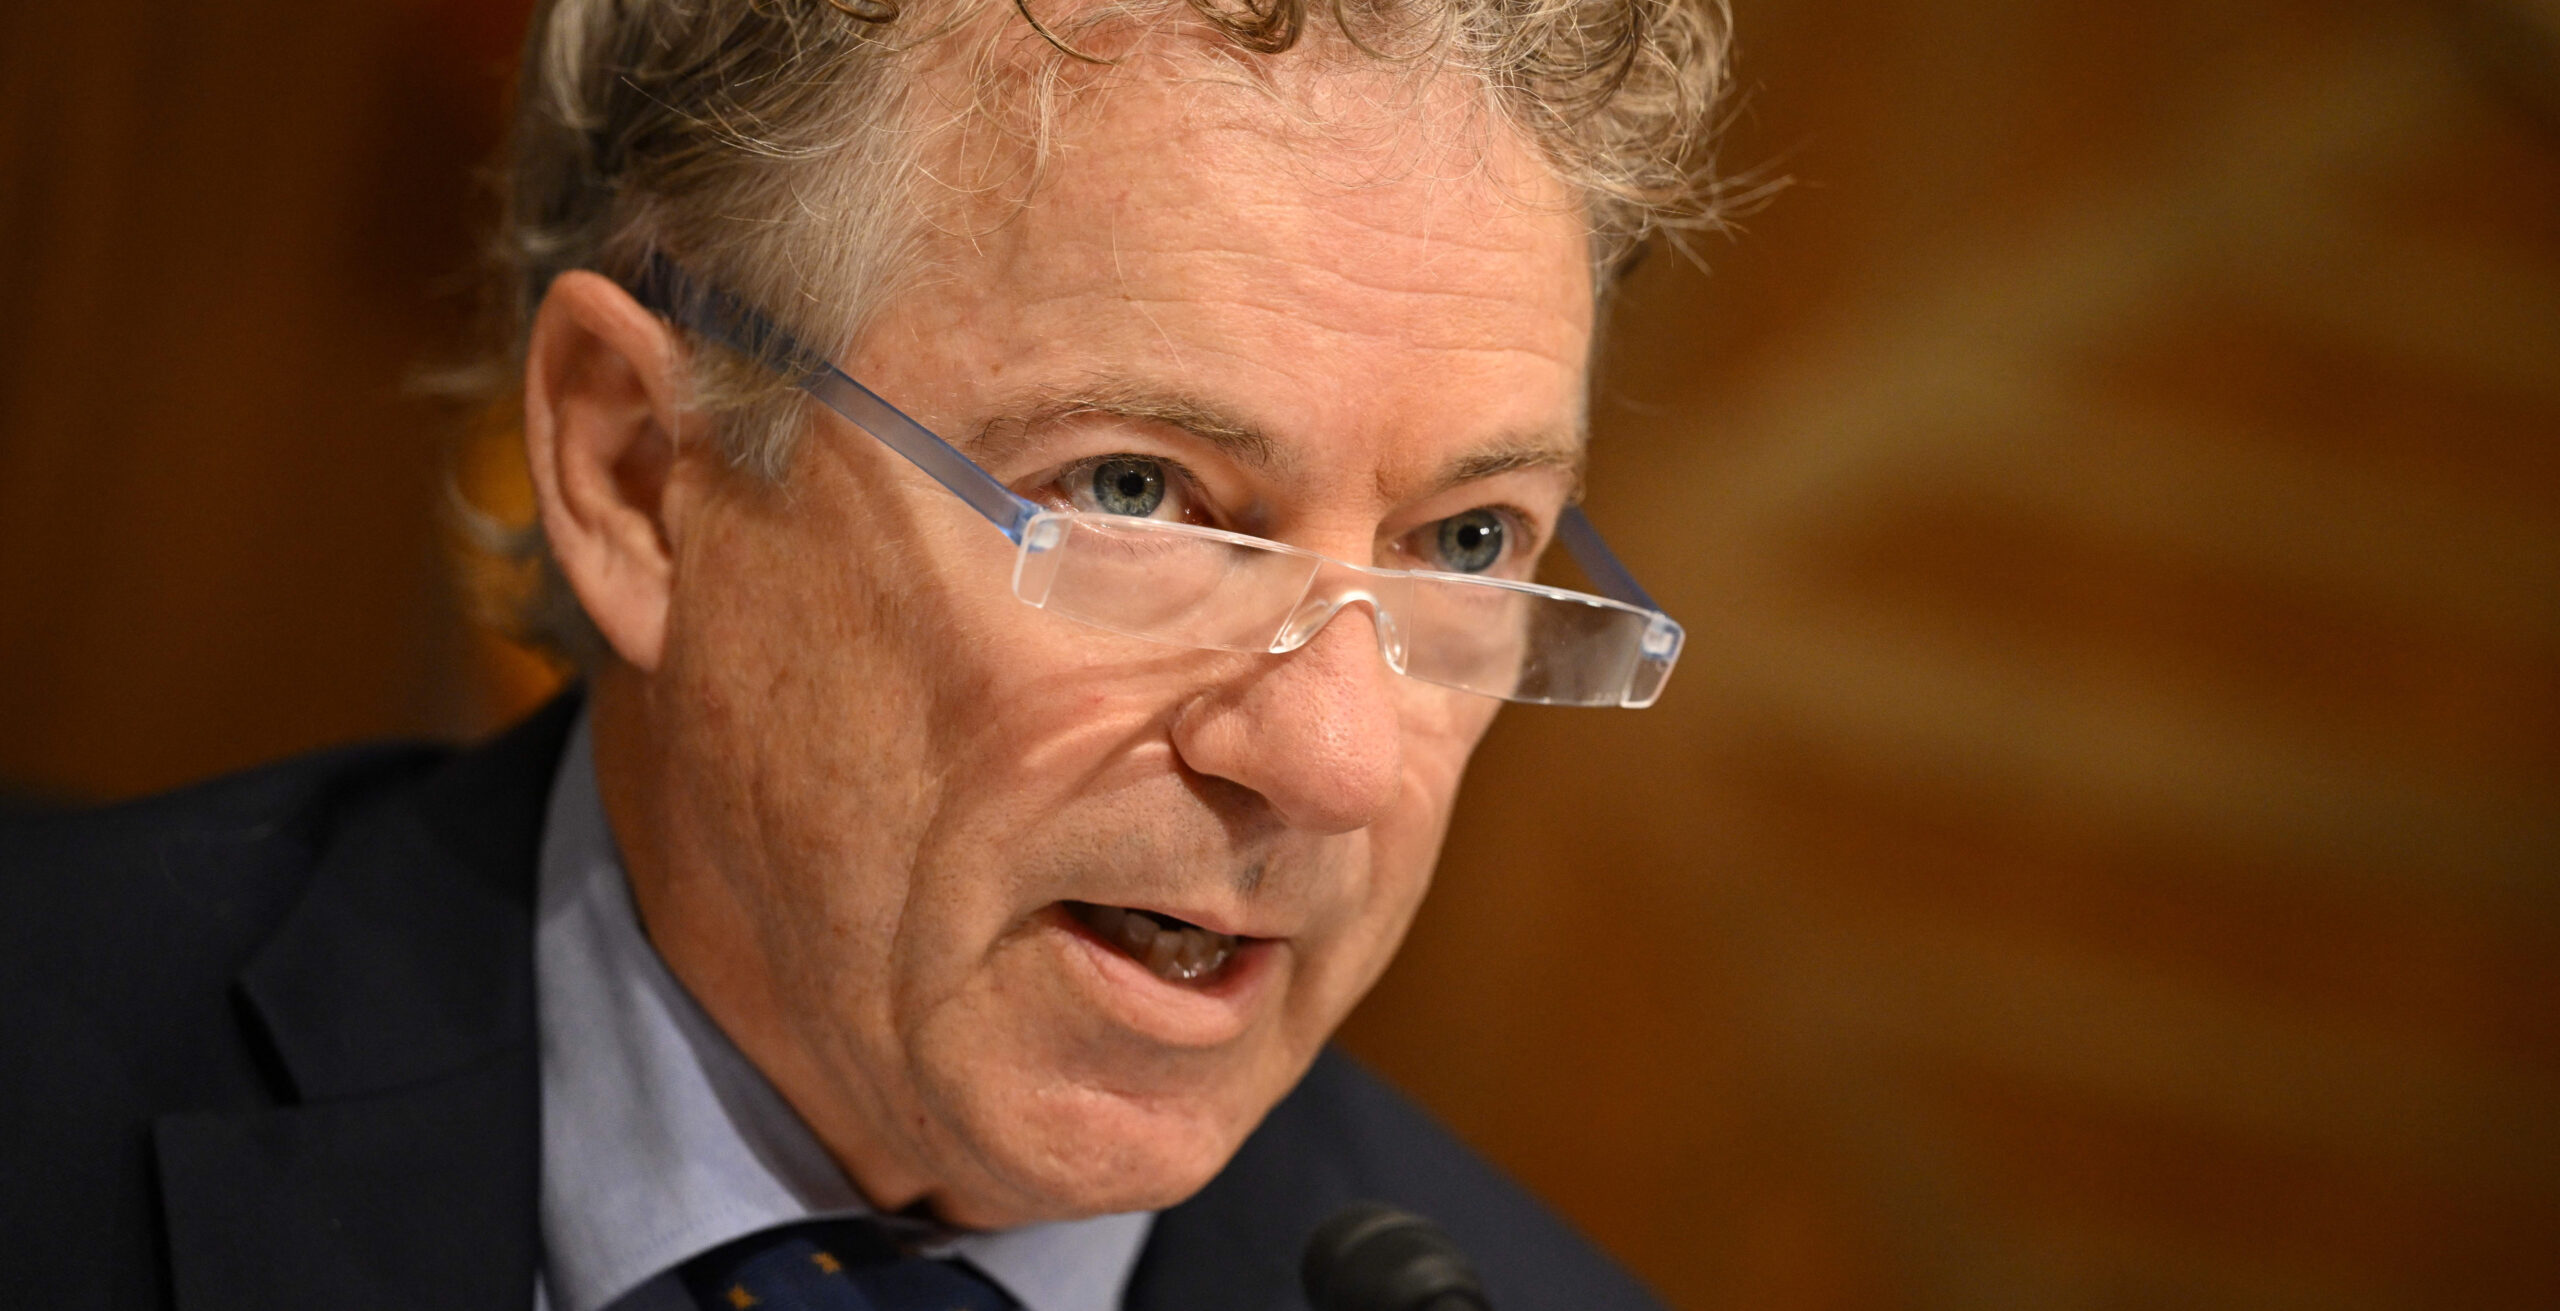 Rand Paul: Americans Fear Two-Tiered System of Justice Under Biden Administration